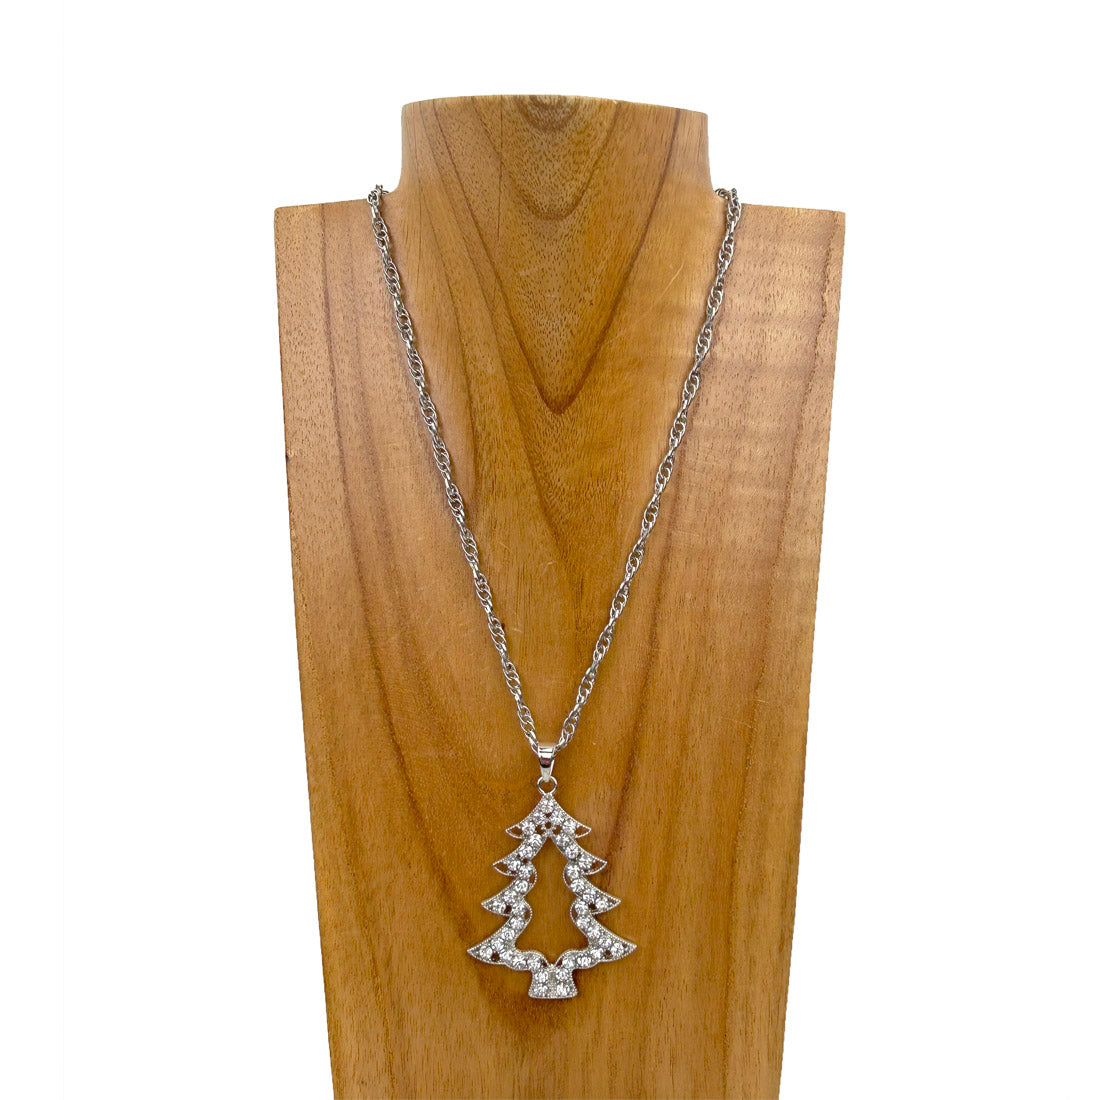 NKS231028-53                  Silver metal chain with clear crystal Christmas tree pendent Necklace